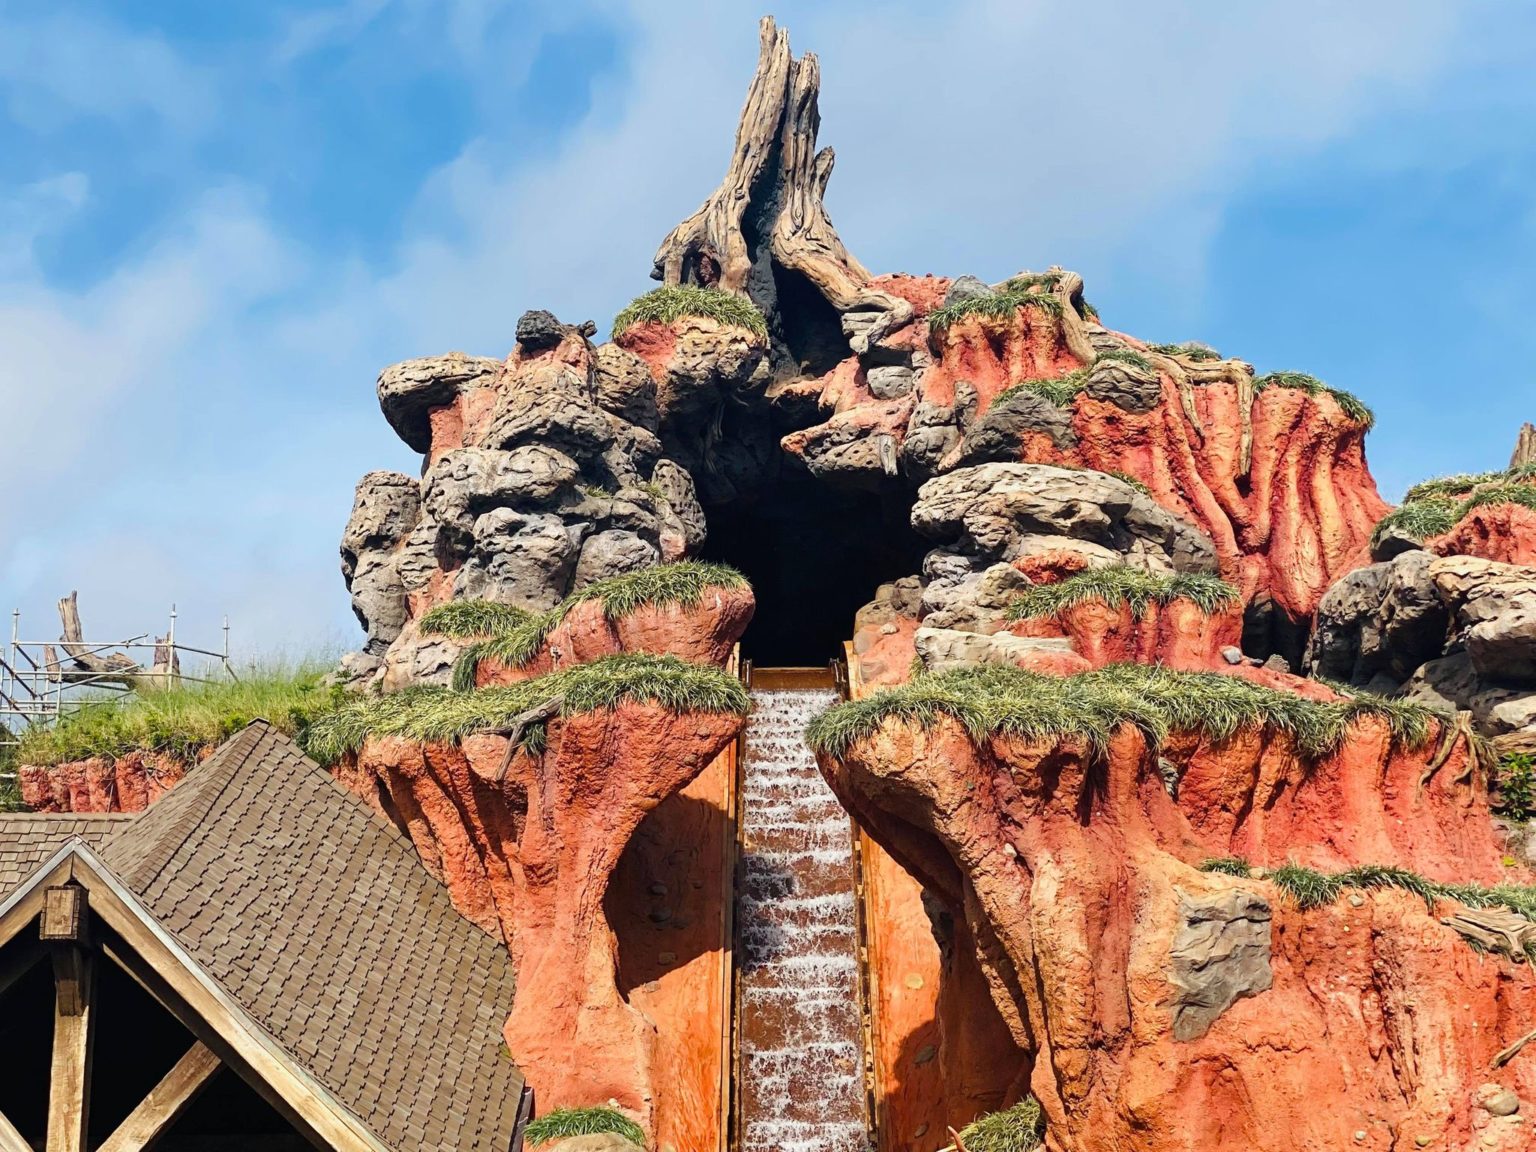 Splash Mountain Reopens After Being Closed AGAIN This Morning